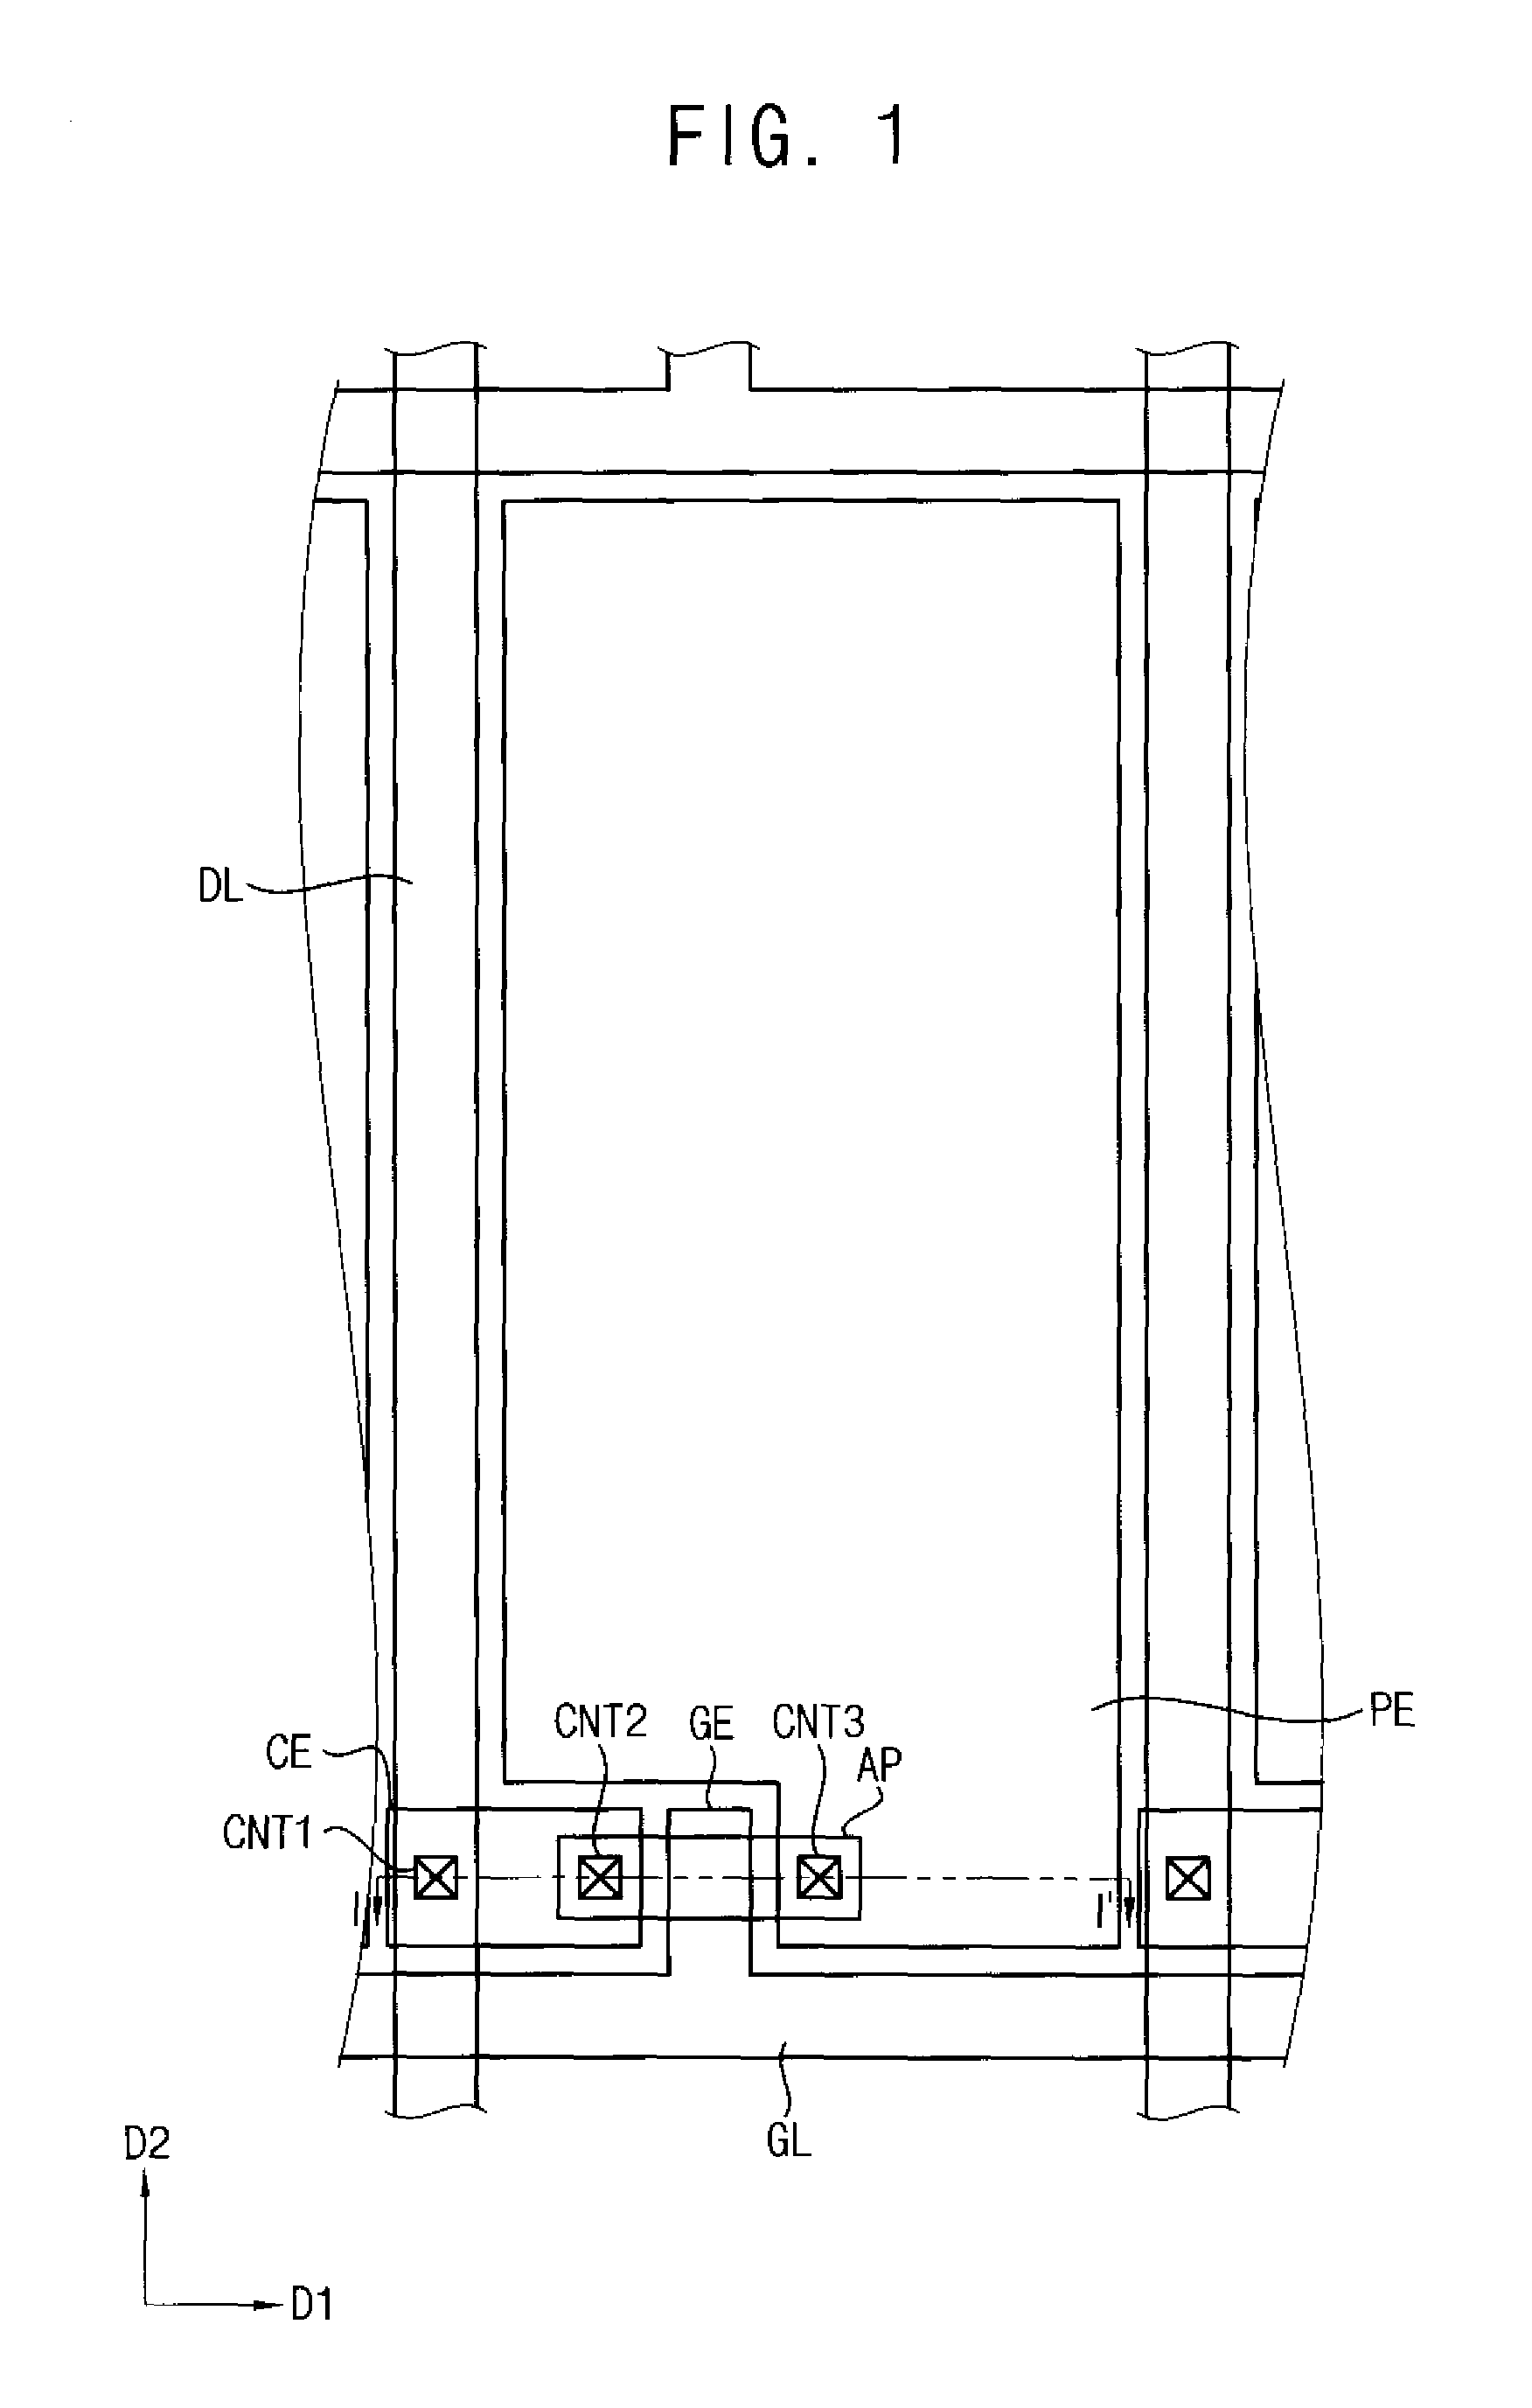 Thin film transistor substrate including a fluorine layer in an active pattern